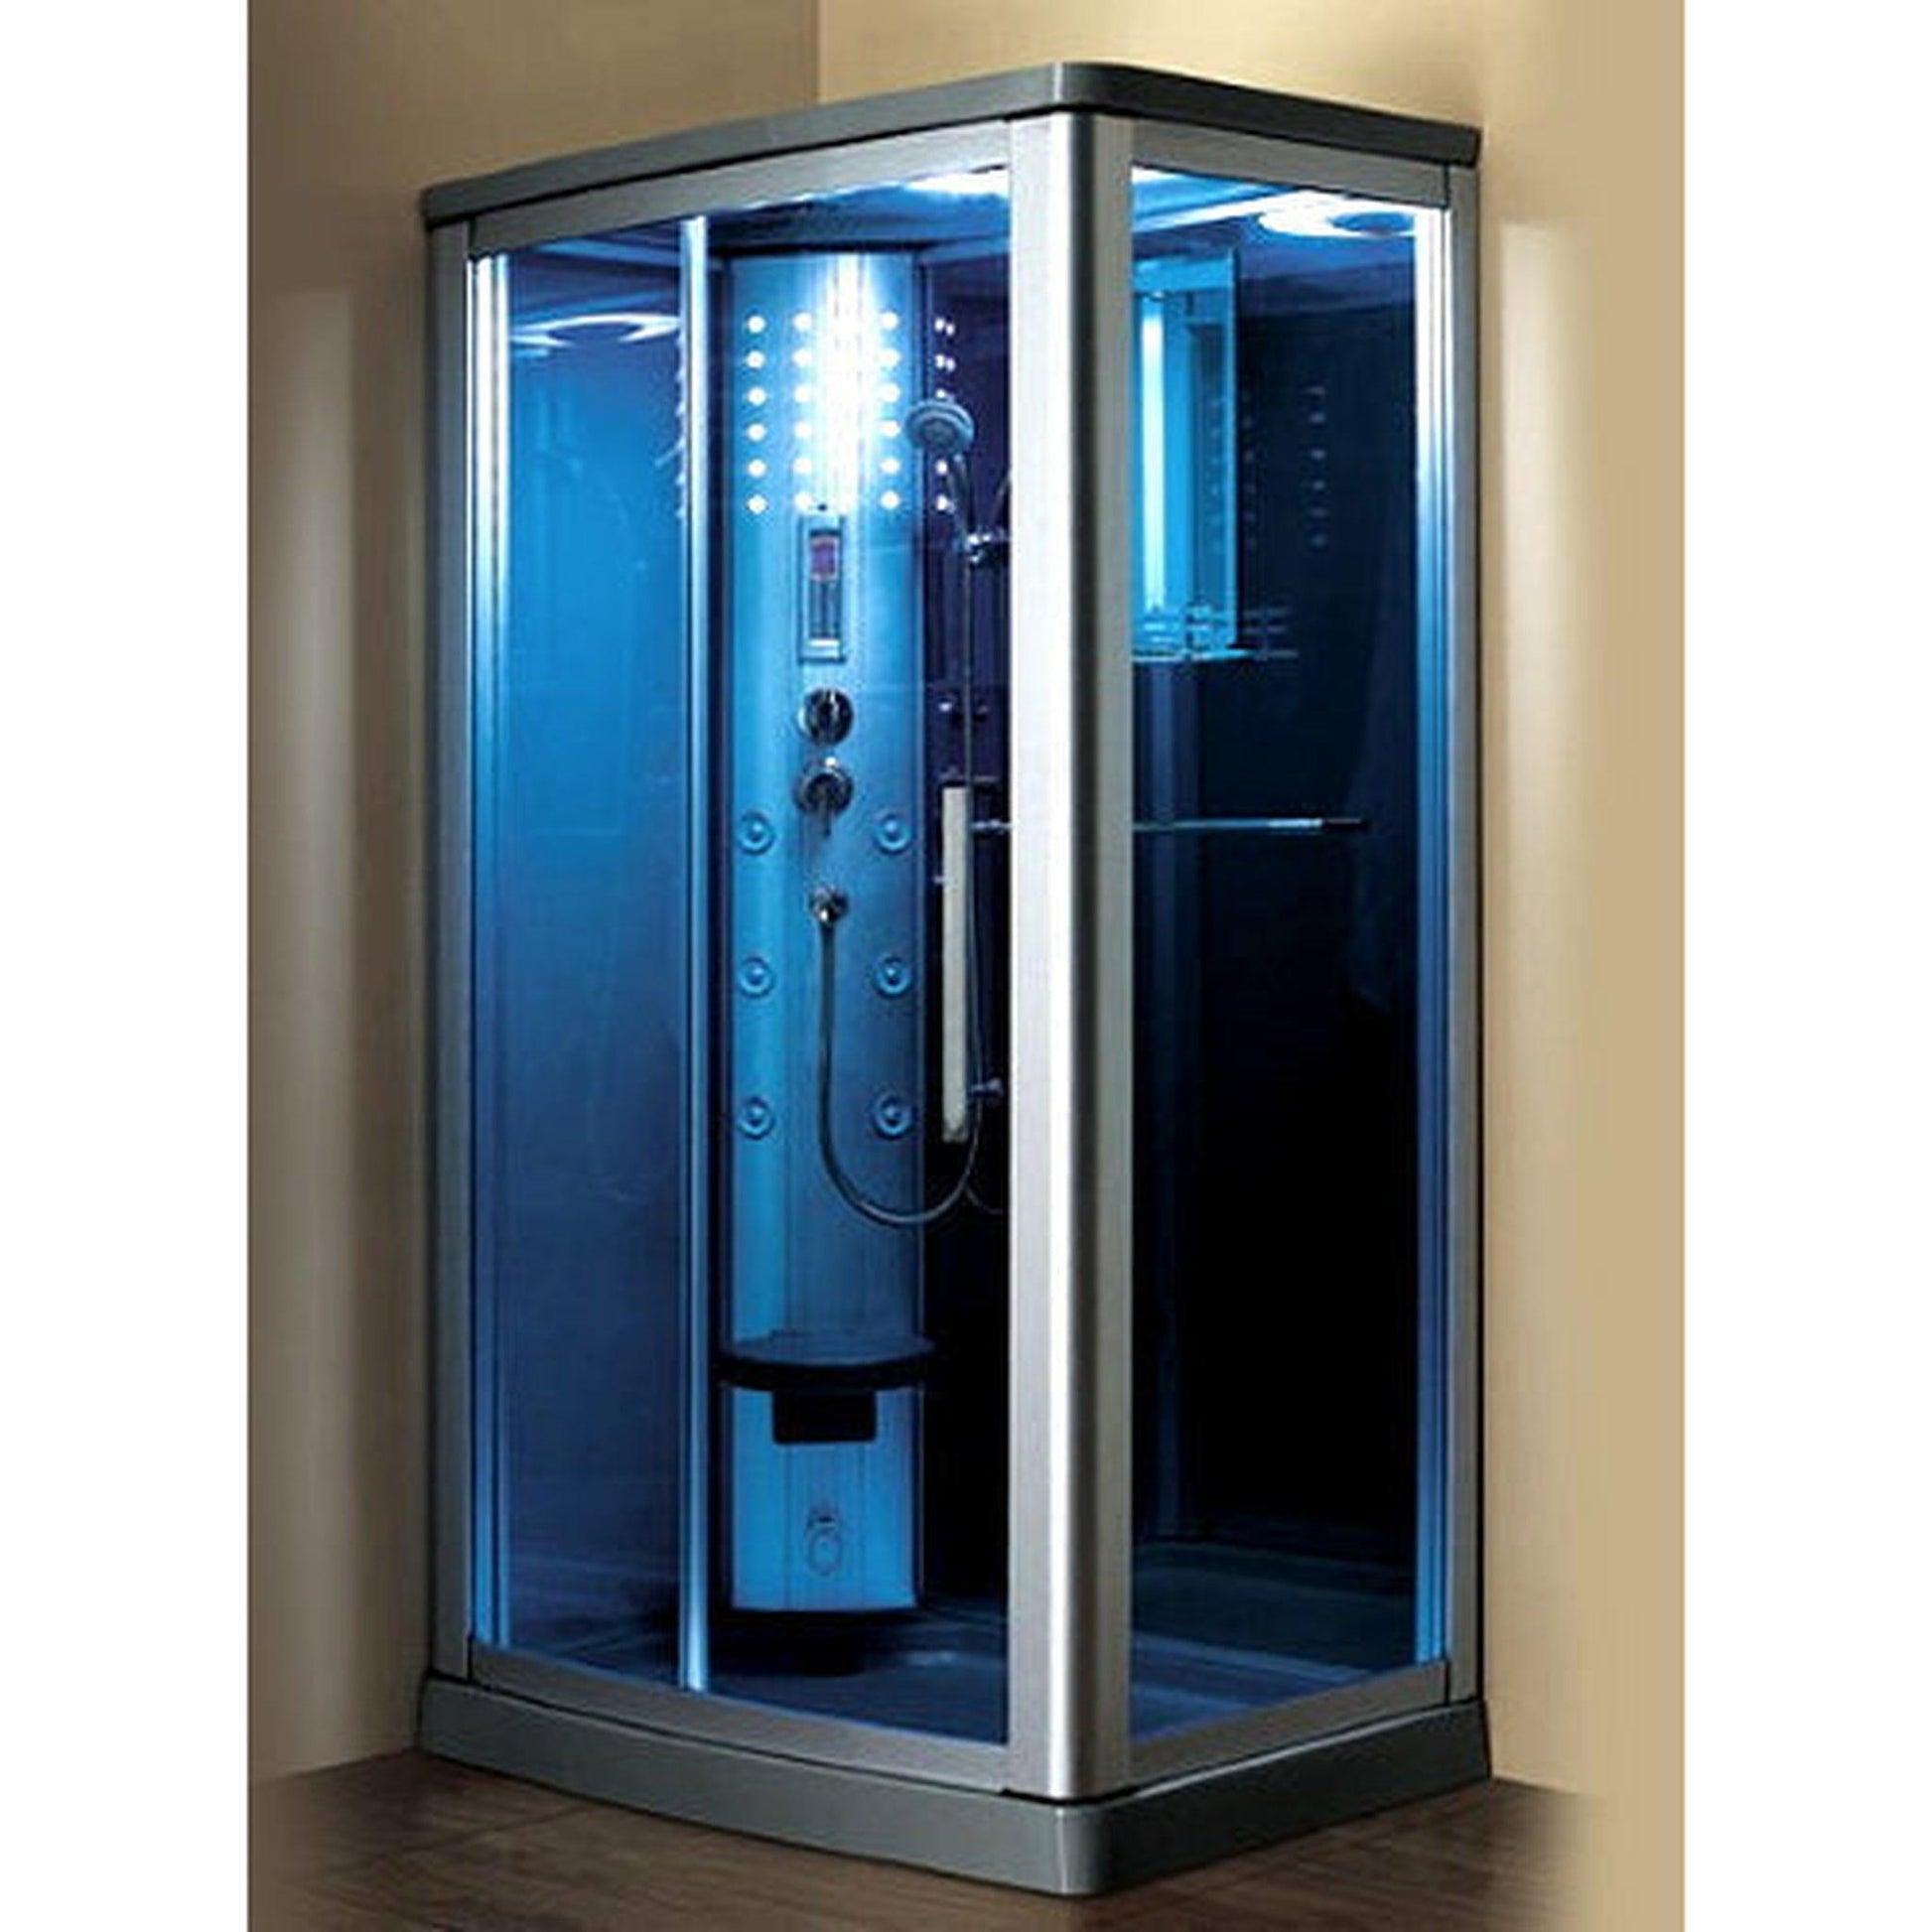 Mesa 45" x 35" x 85" Blue Tempered Glass Freestanding Walk In Steam Shower With Left-Hand Control Panel Configuration, 3kW Steam Generator and 6 Acupuncture Water Body Jets